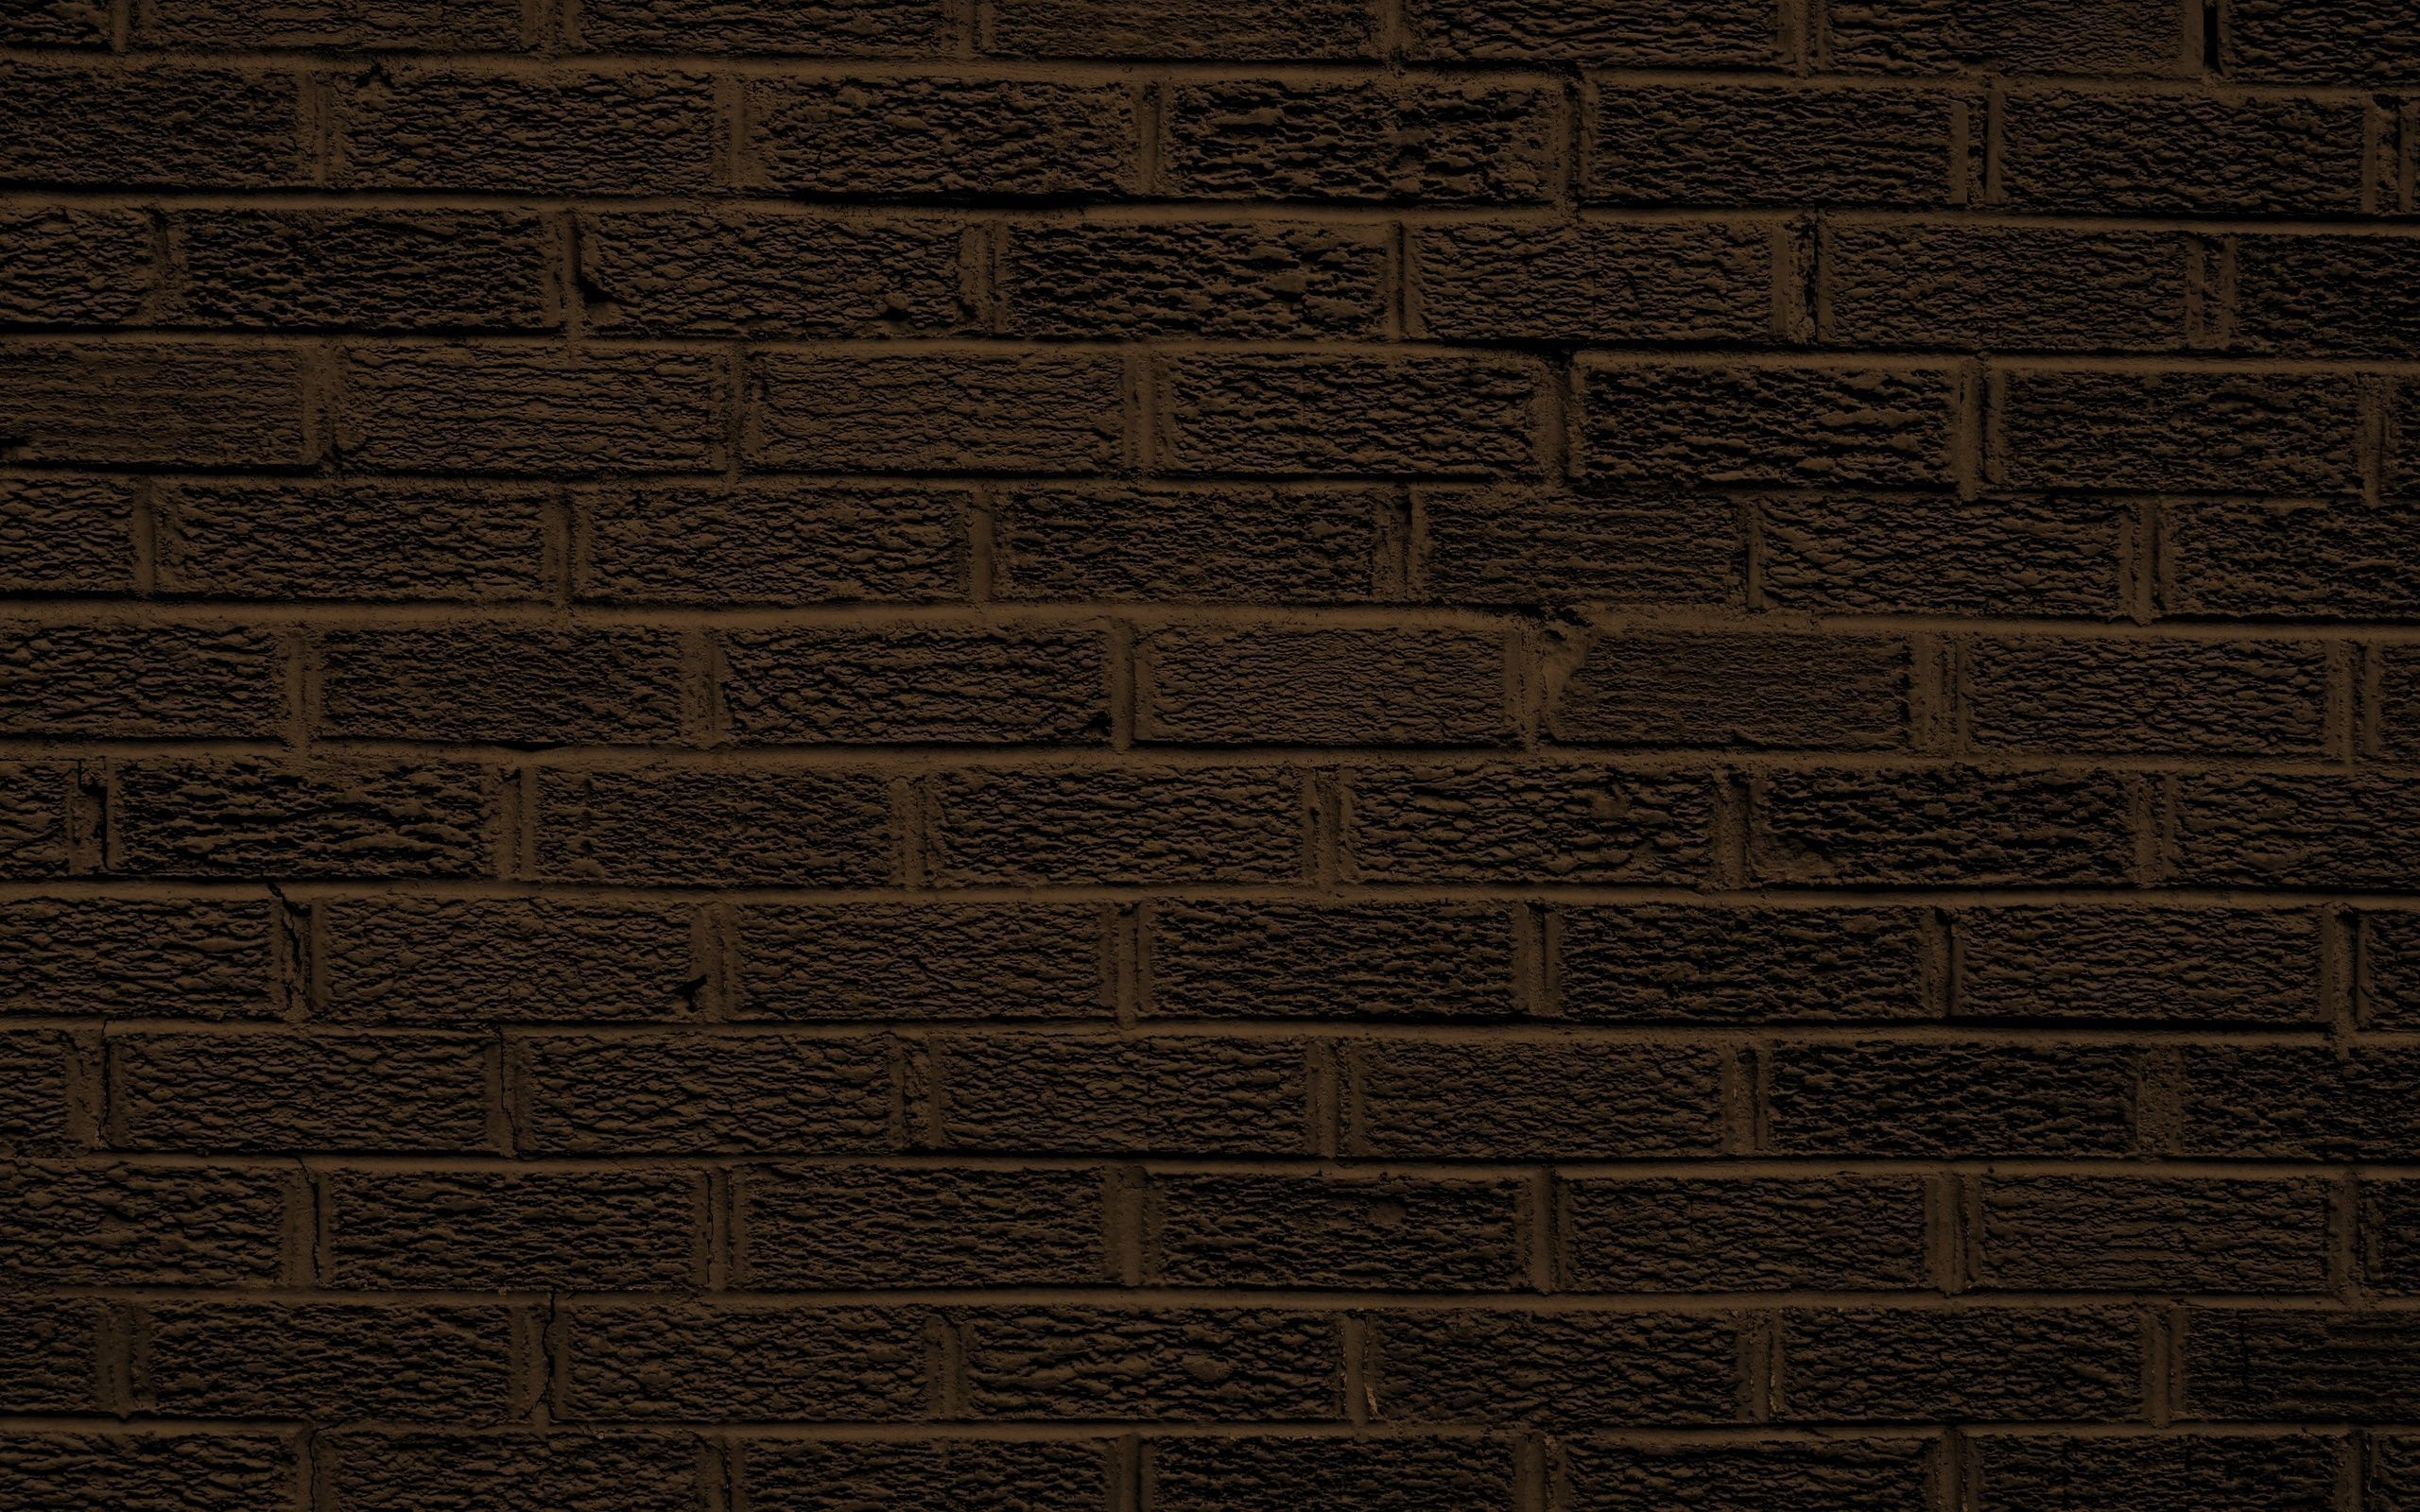 43 Brick HD Wallpapers | Backgrounds - Wallpaper Abyss